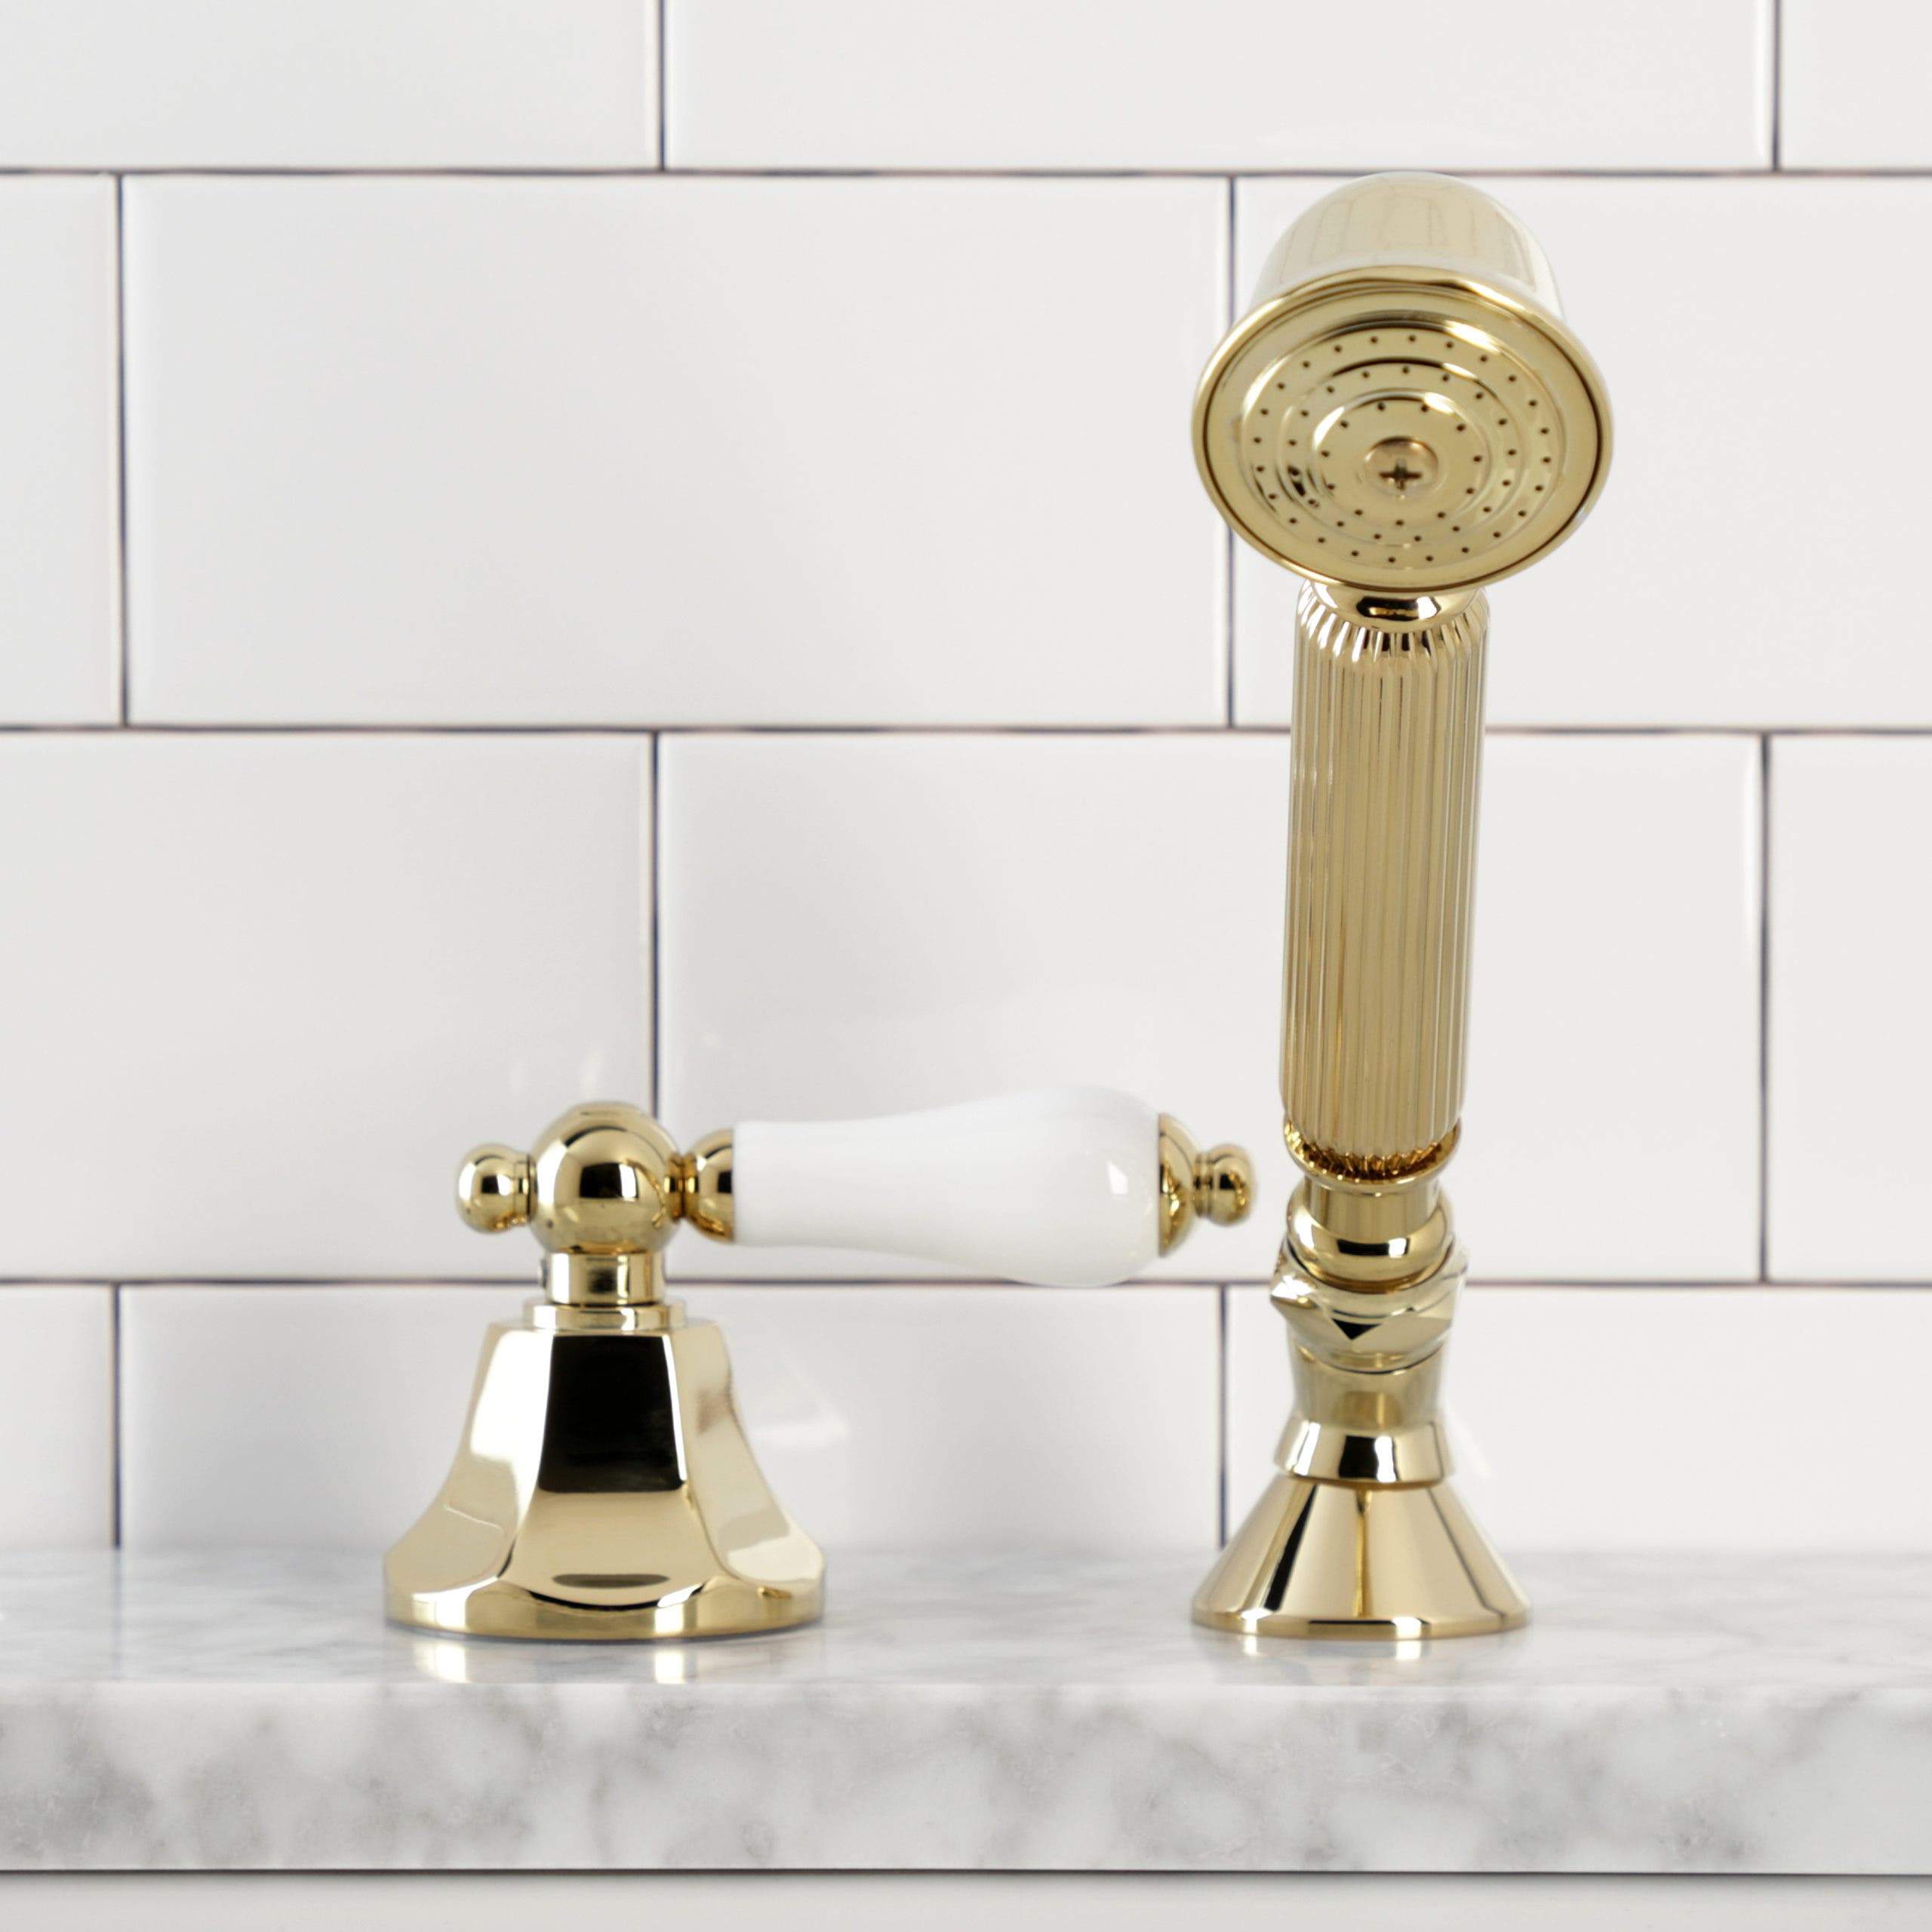 Kingston Brass Deck Mount Hand Shower with Diverter for Roman Tub Faucet